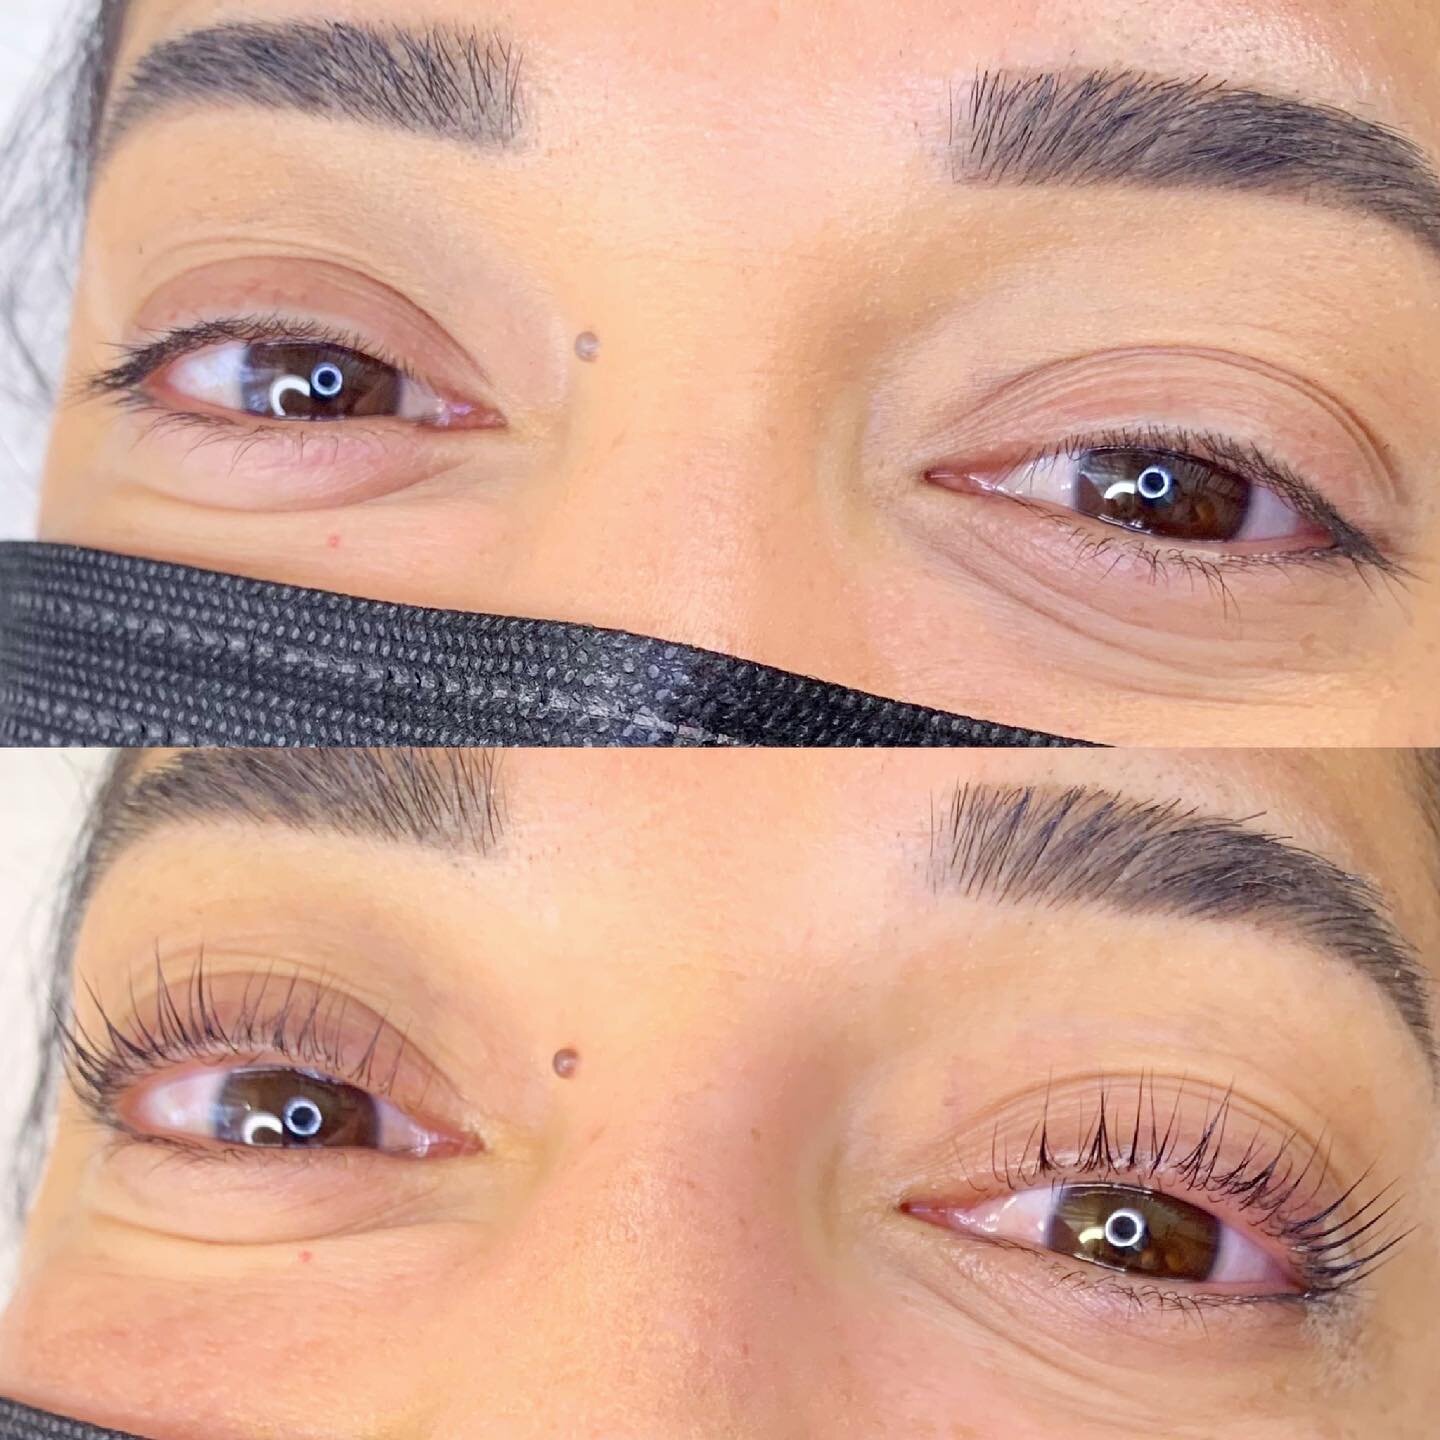 Summer is almost here! ☀️ Well, here in Oki, it feels like it has already arrived. 🙃

Make getting ready for all your summer adventures as low maintenance as possible, with sunscreen and some beautiful lifted lashes! 

Book a Lash Lift and have beau